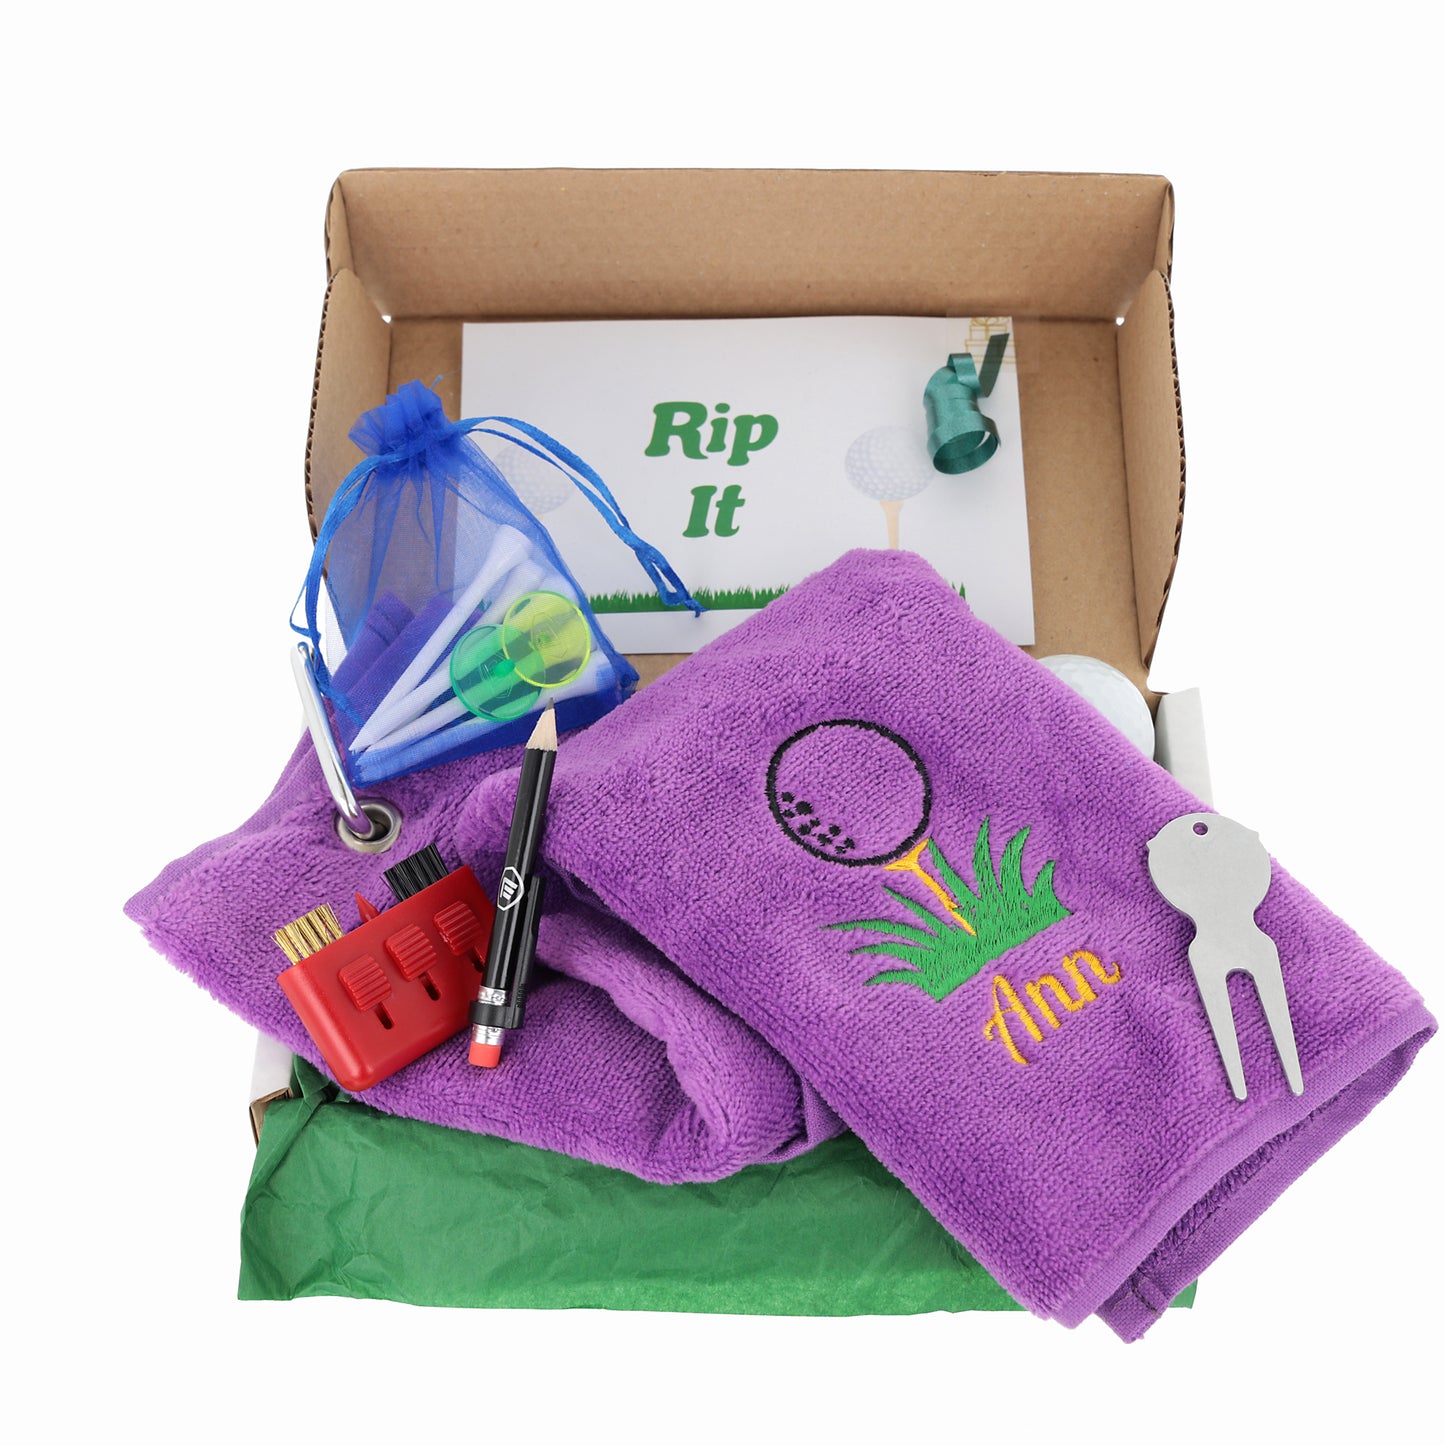 Personalised Tri Fold Golf Towel with Name Golfing Gift Box  - Always Looking Good - Purple Towel  